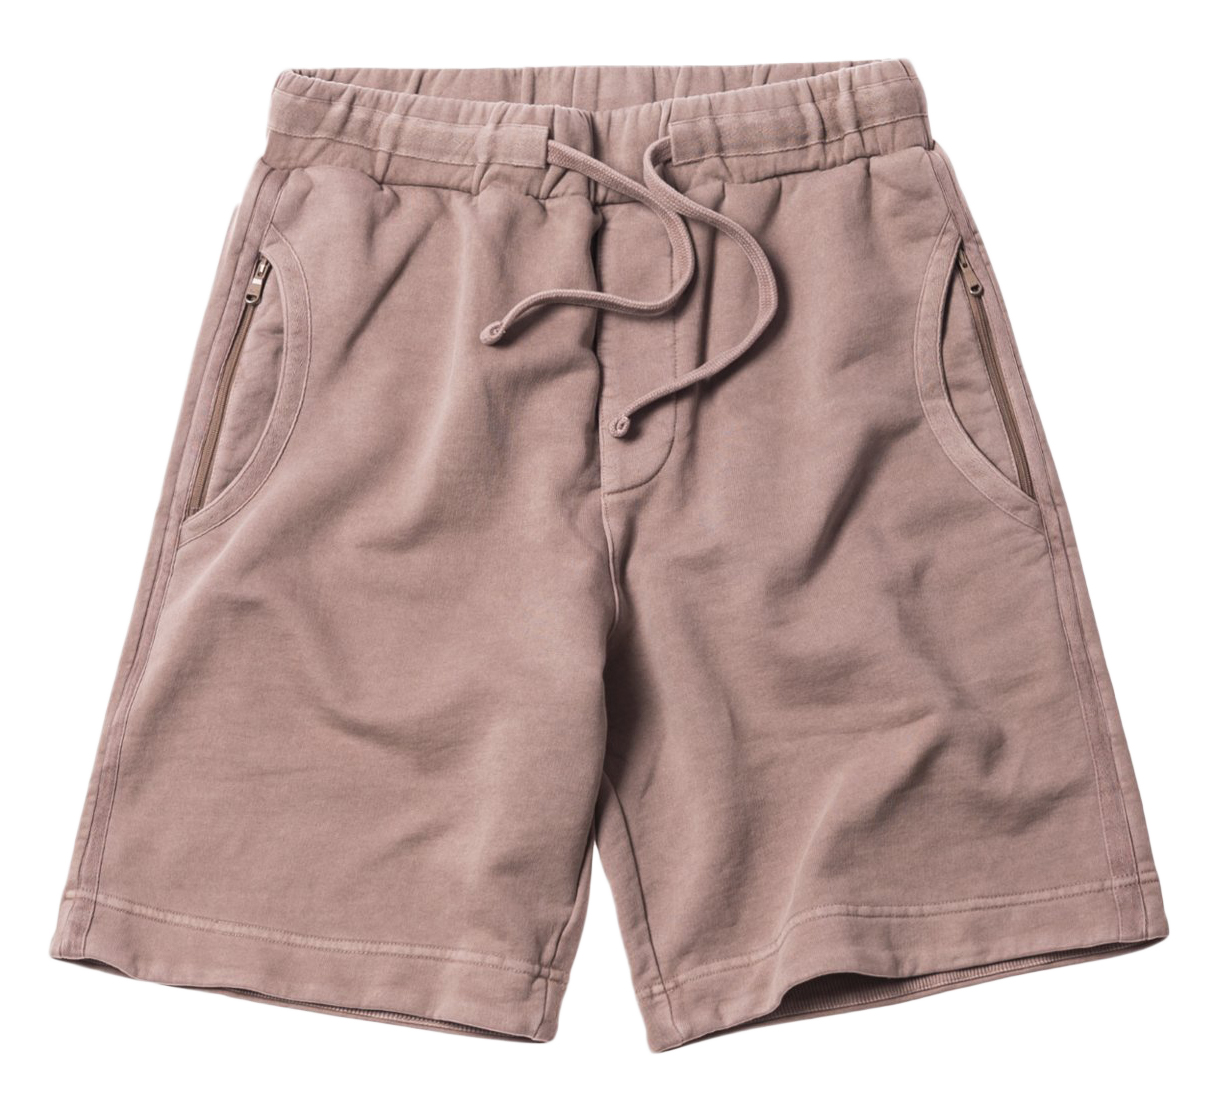 Kith Ritchie shorts Cinder M